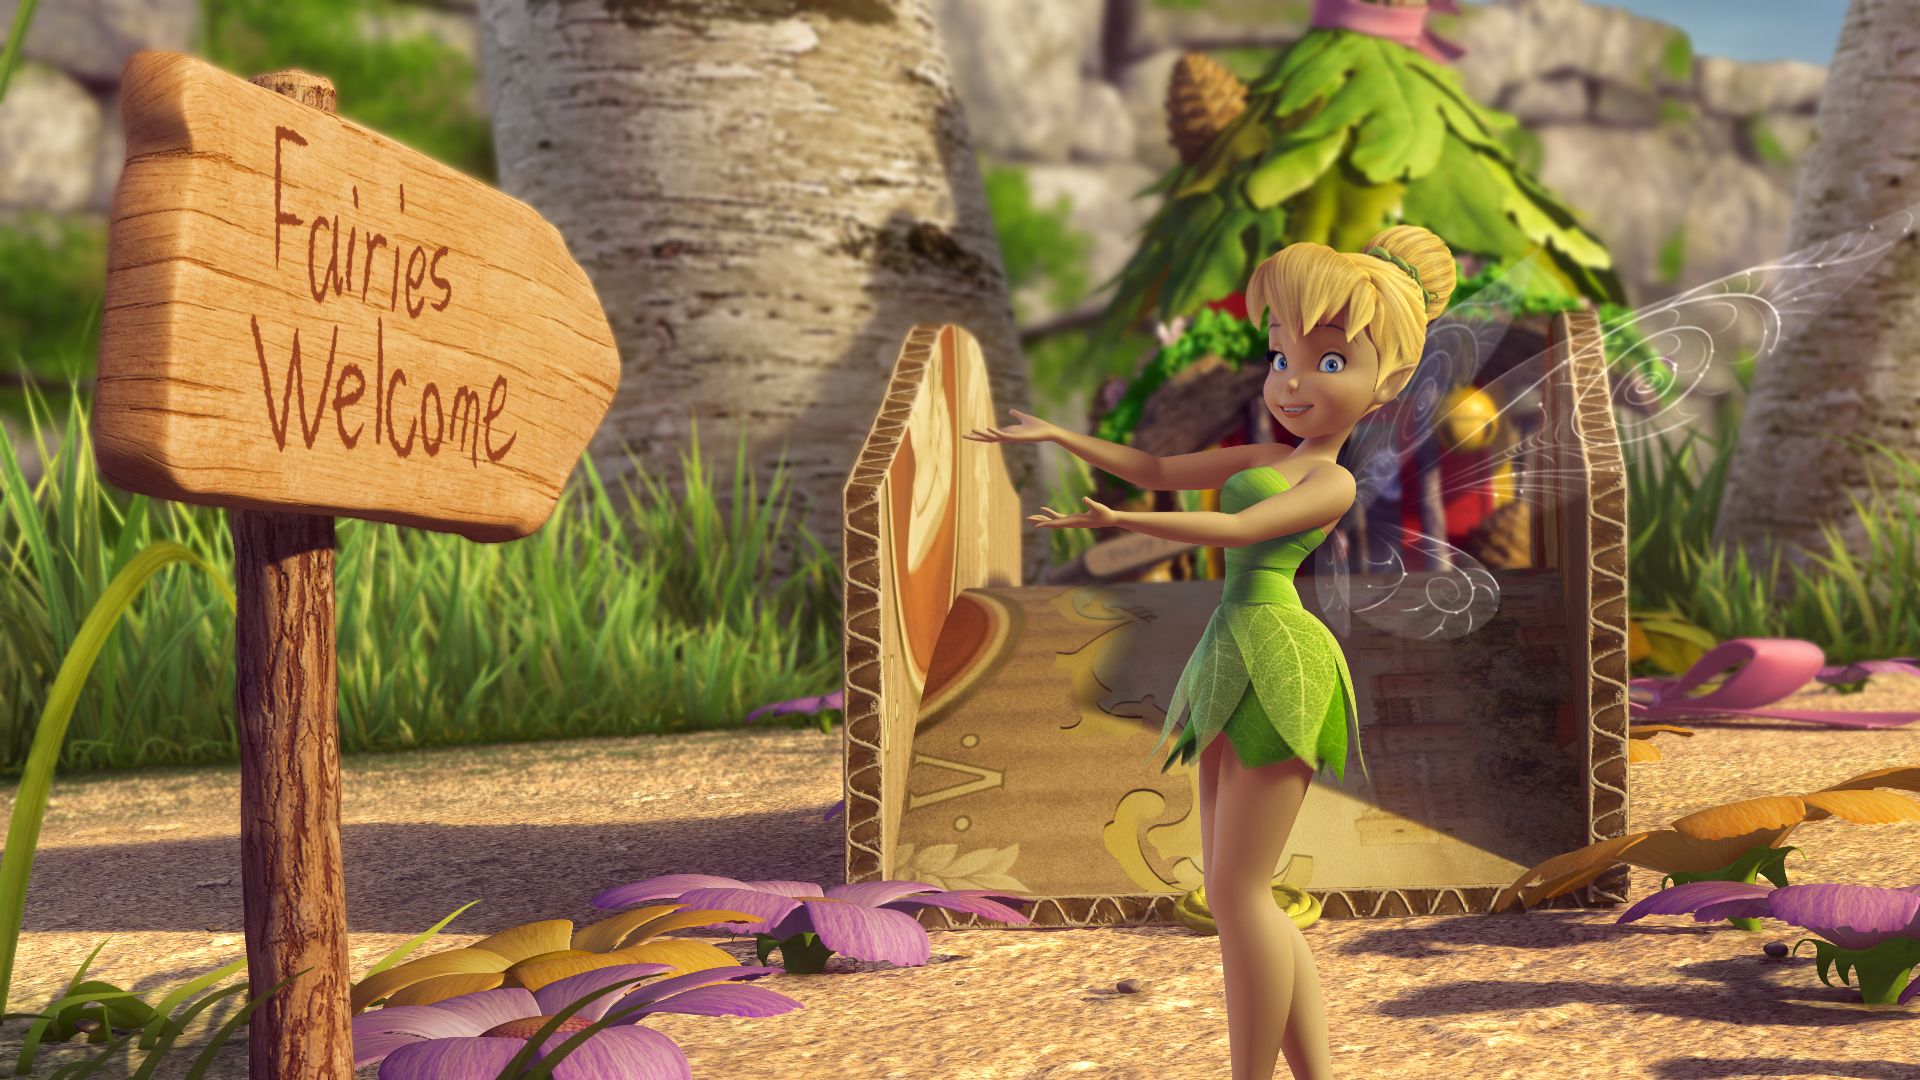 tinkerbell_and_the_great_fairy_rescue_movie_image_01.jpg